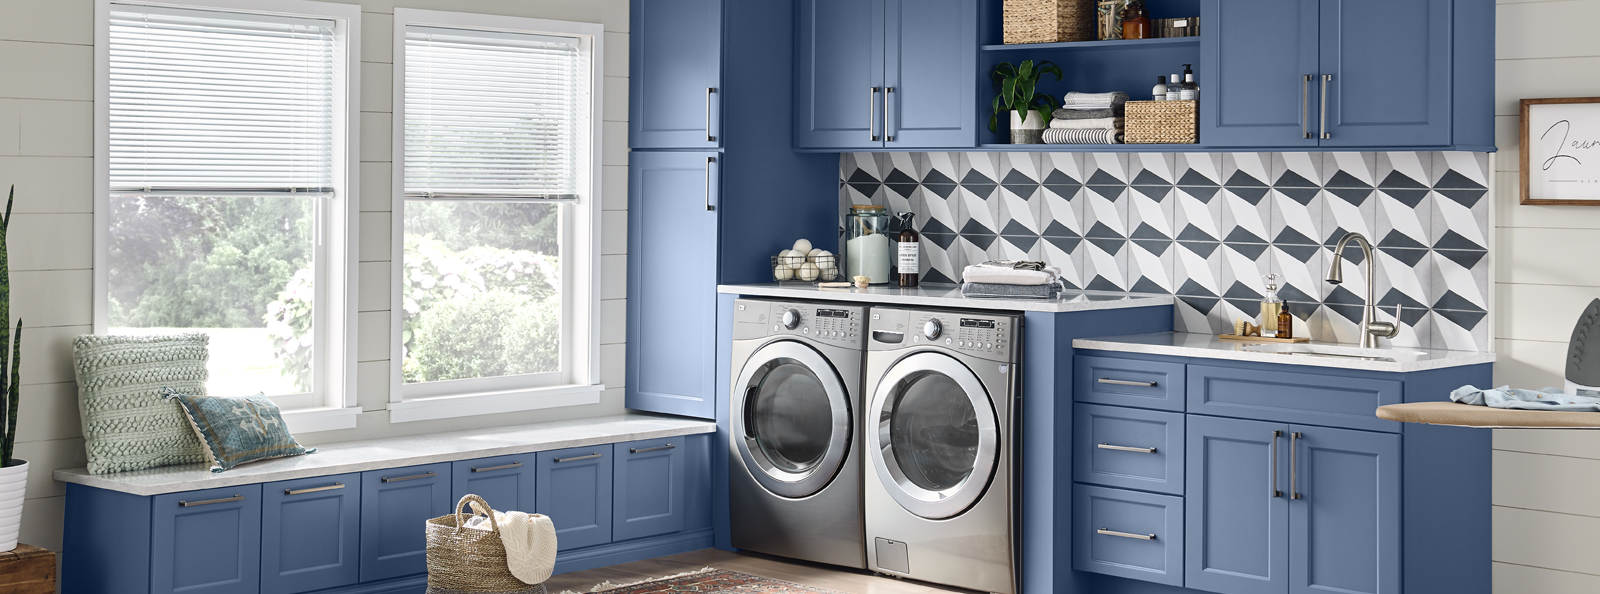 Things That Inspire: Laundry Rooms